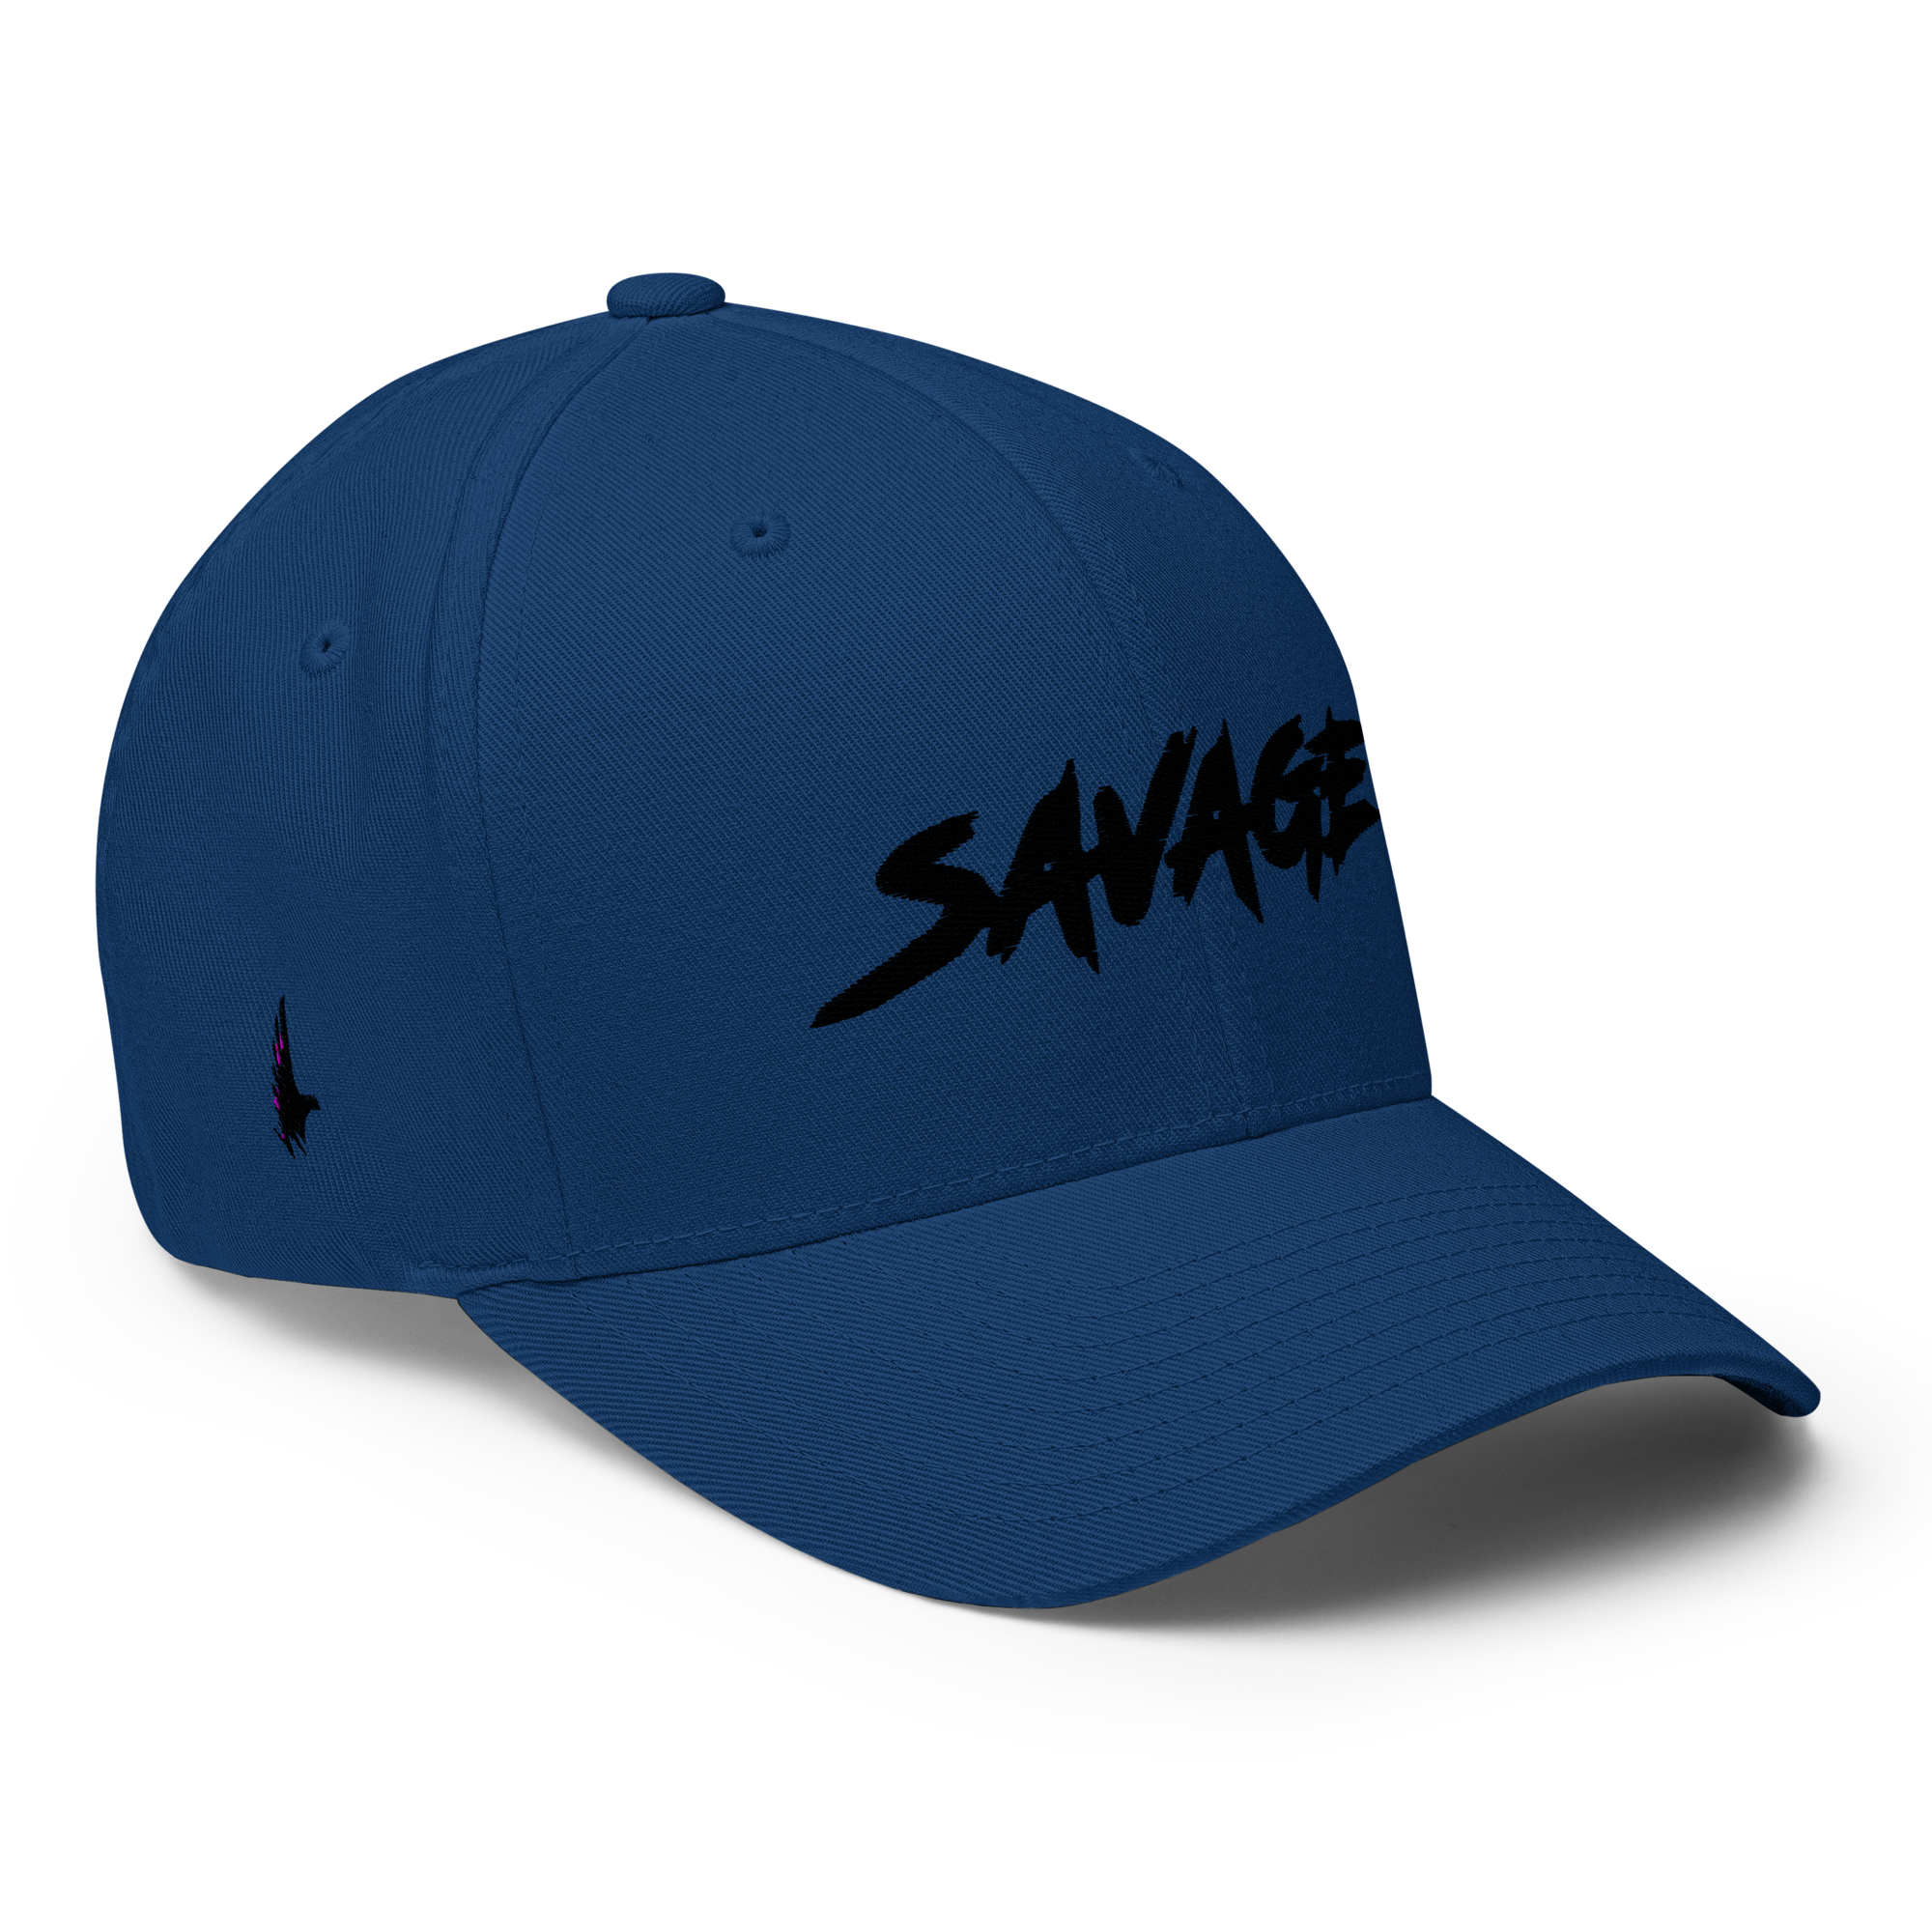 Savage Fitted Hat Blue Black - Loyalty Vibes